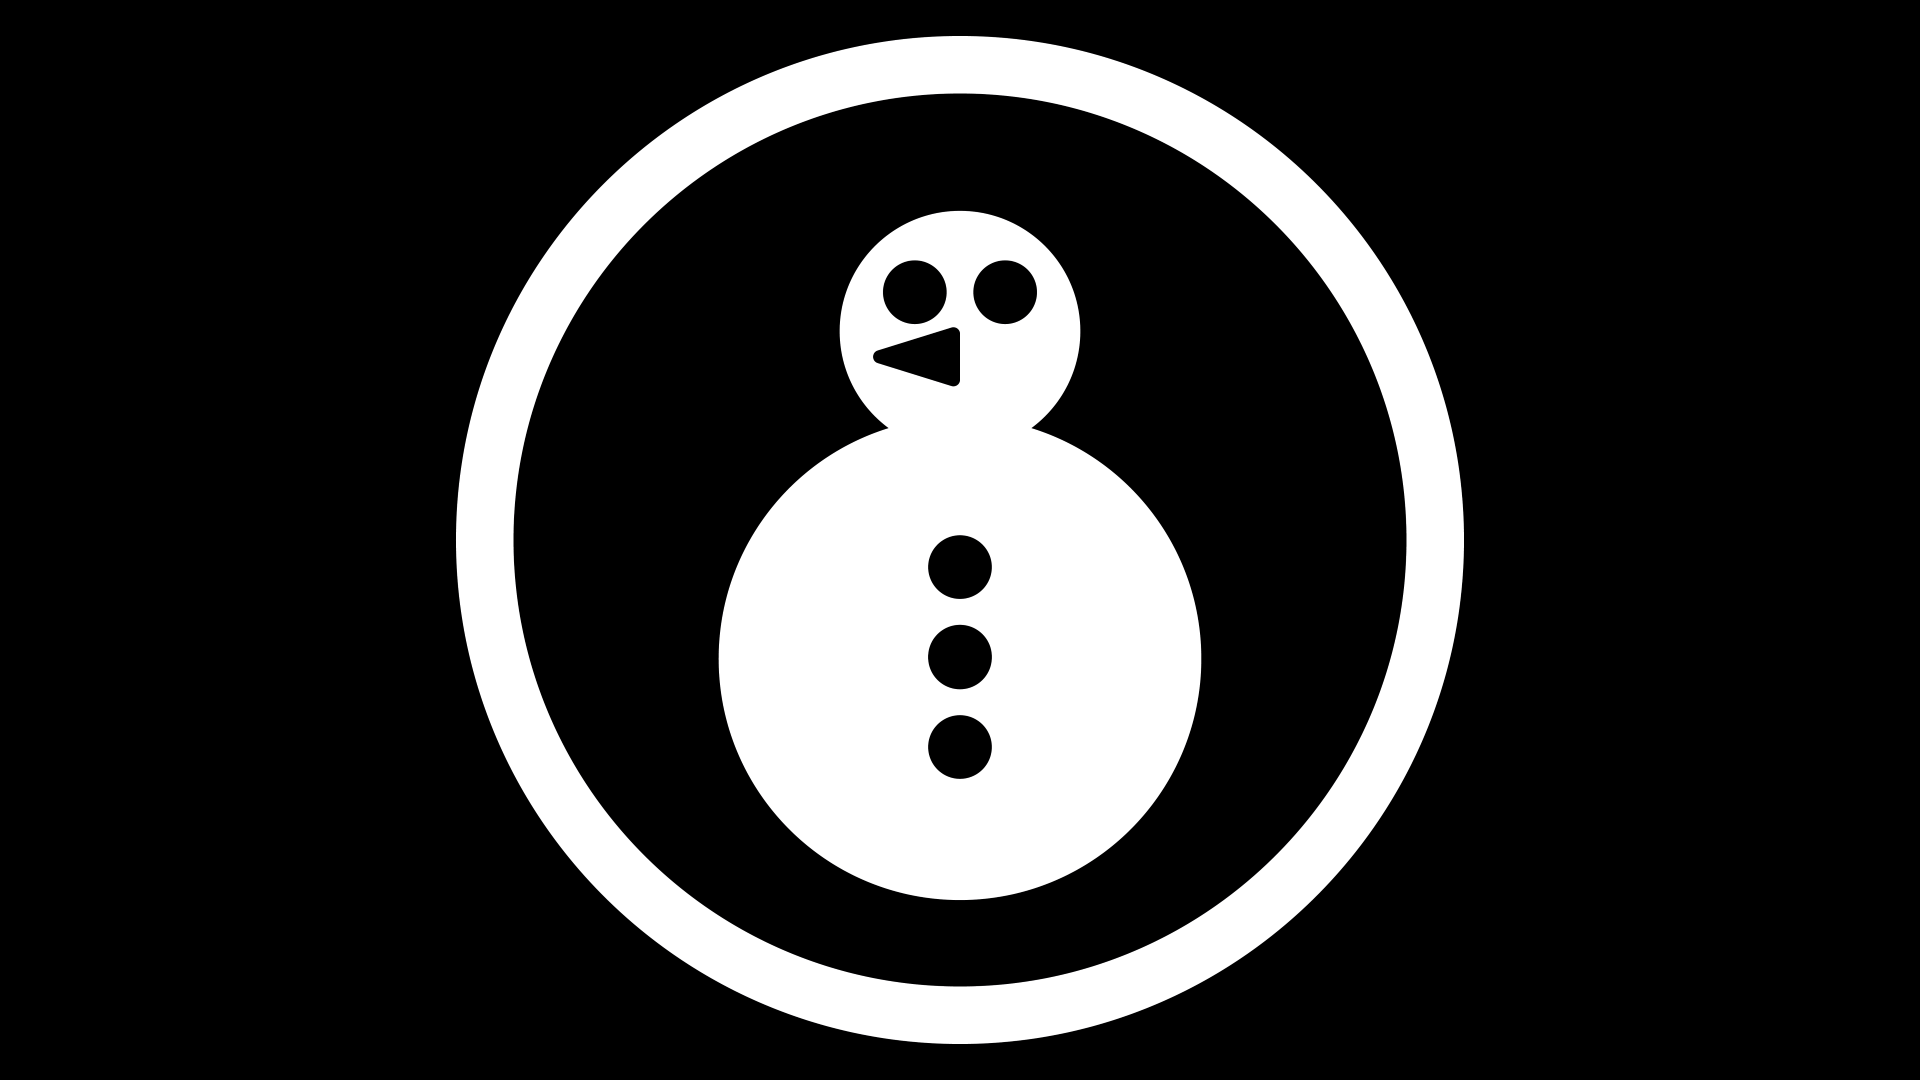 Icon for SNOWMAN